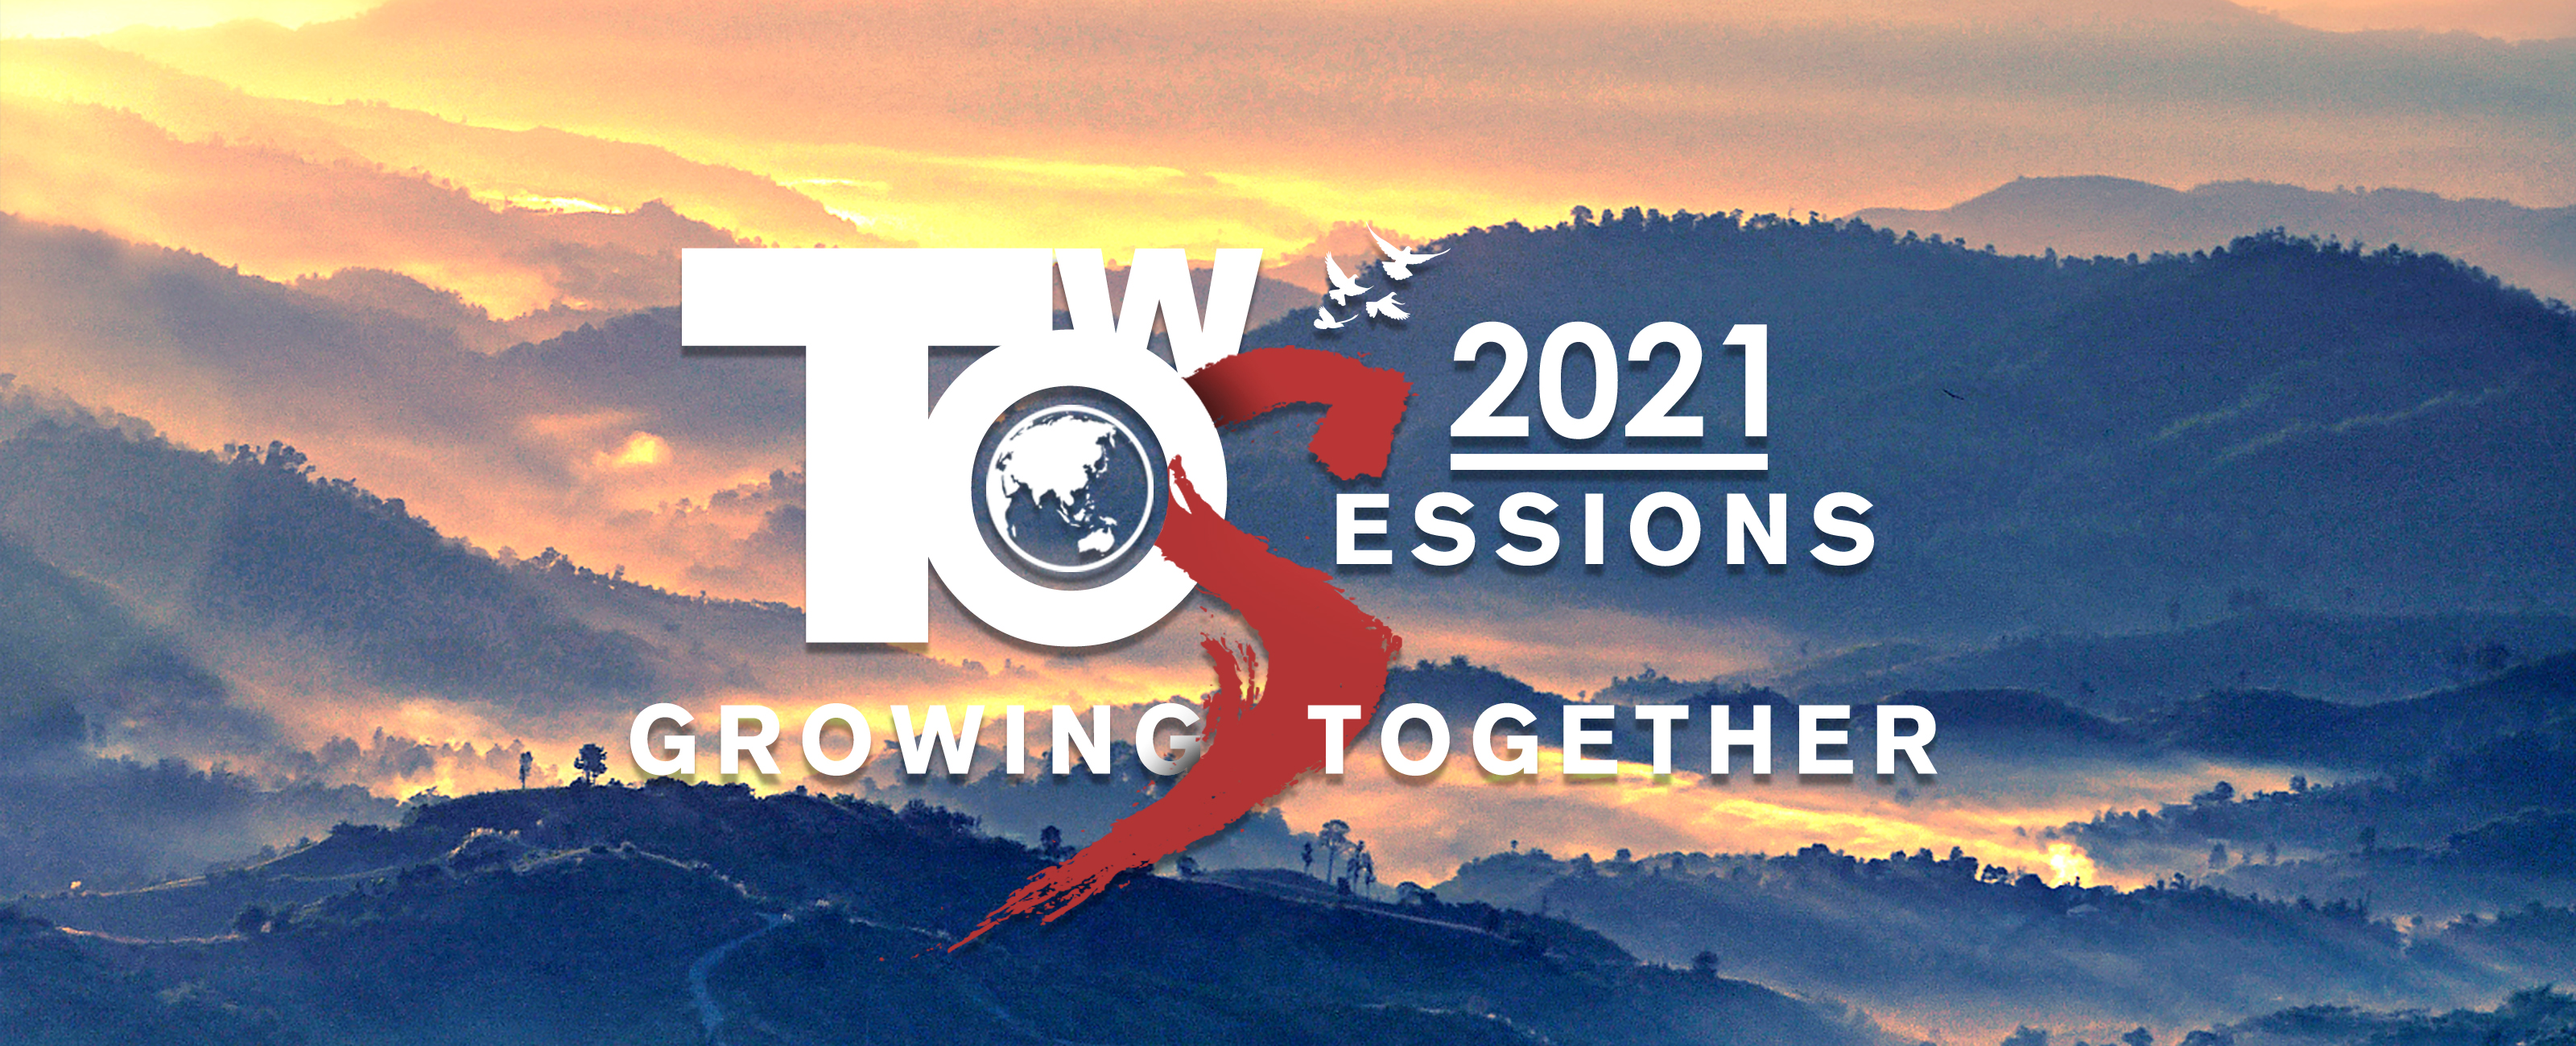 2021 Two Sessions